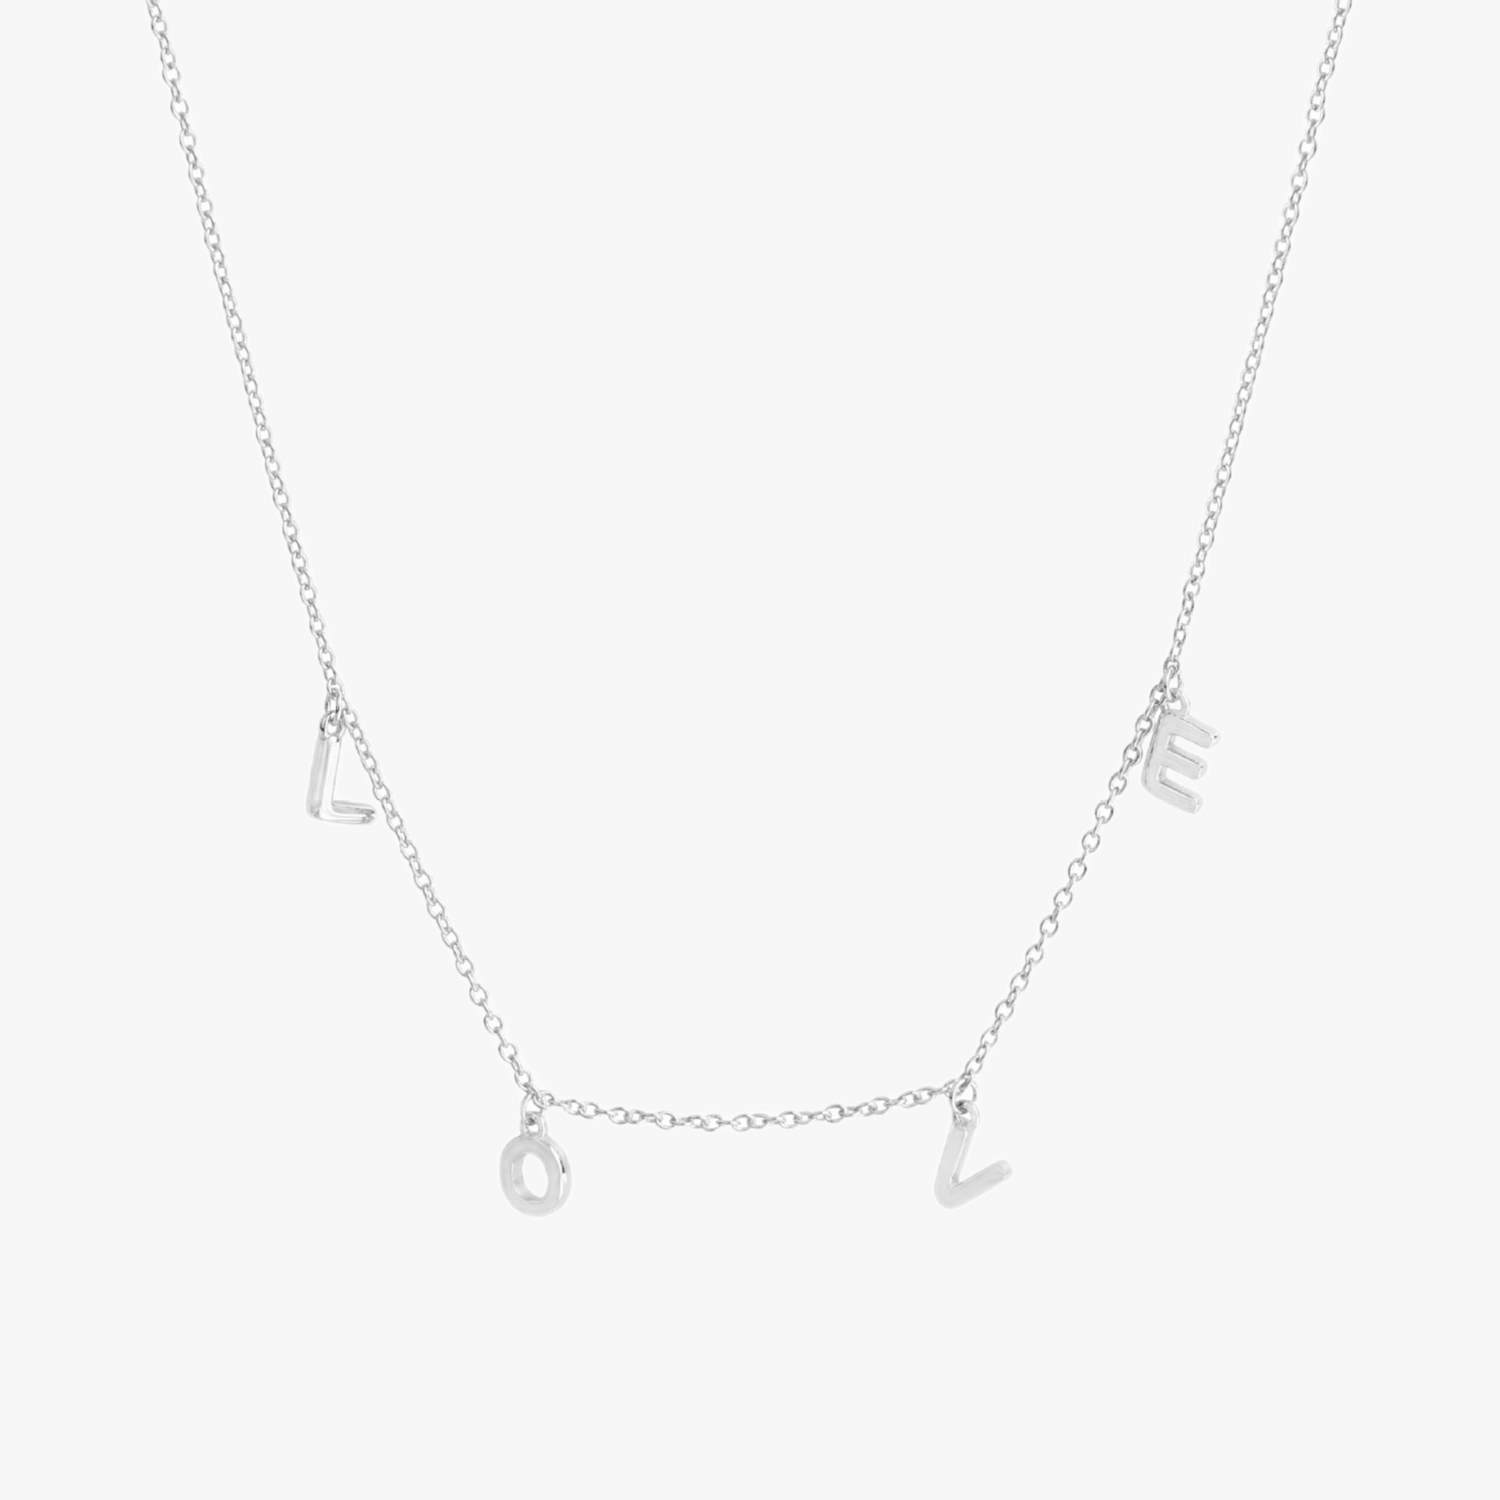 Spaced LOVE Necklace